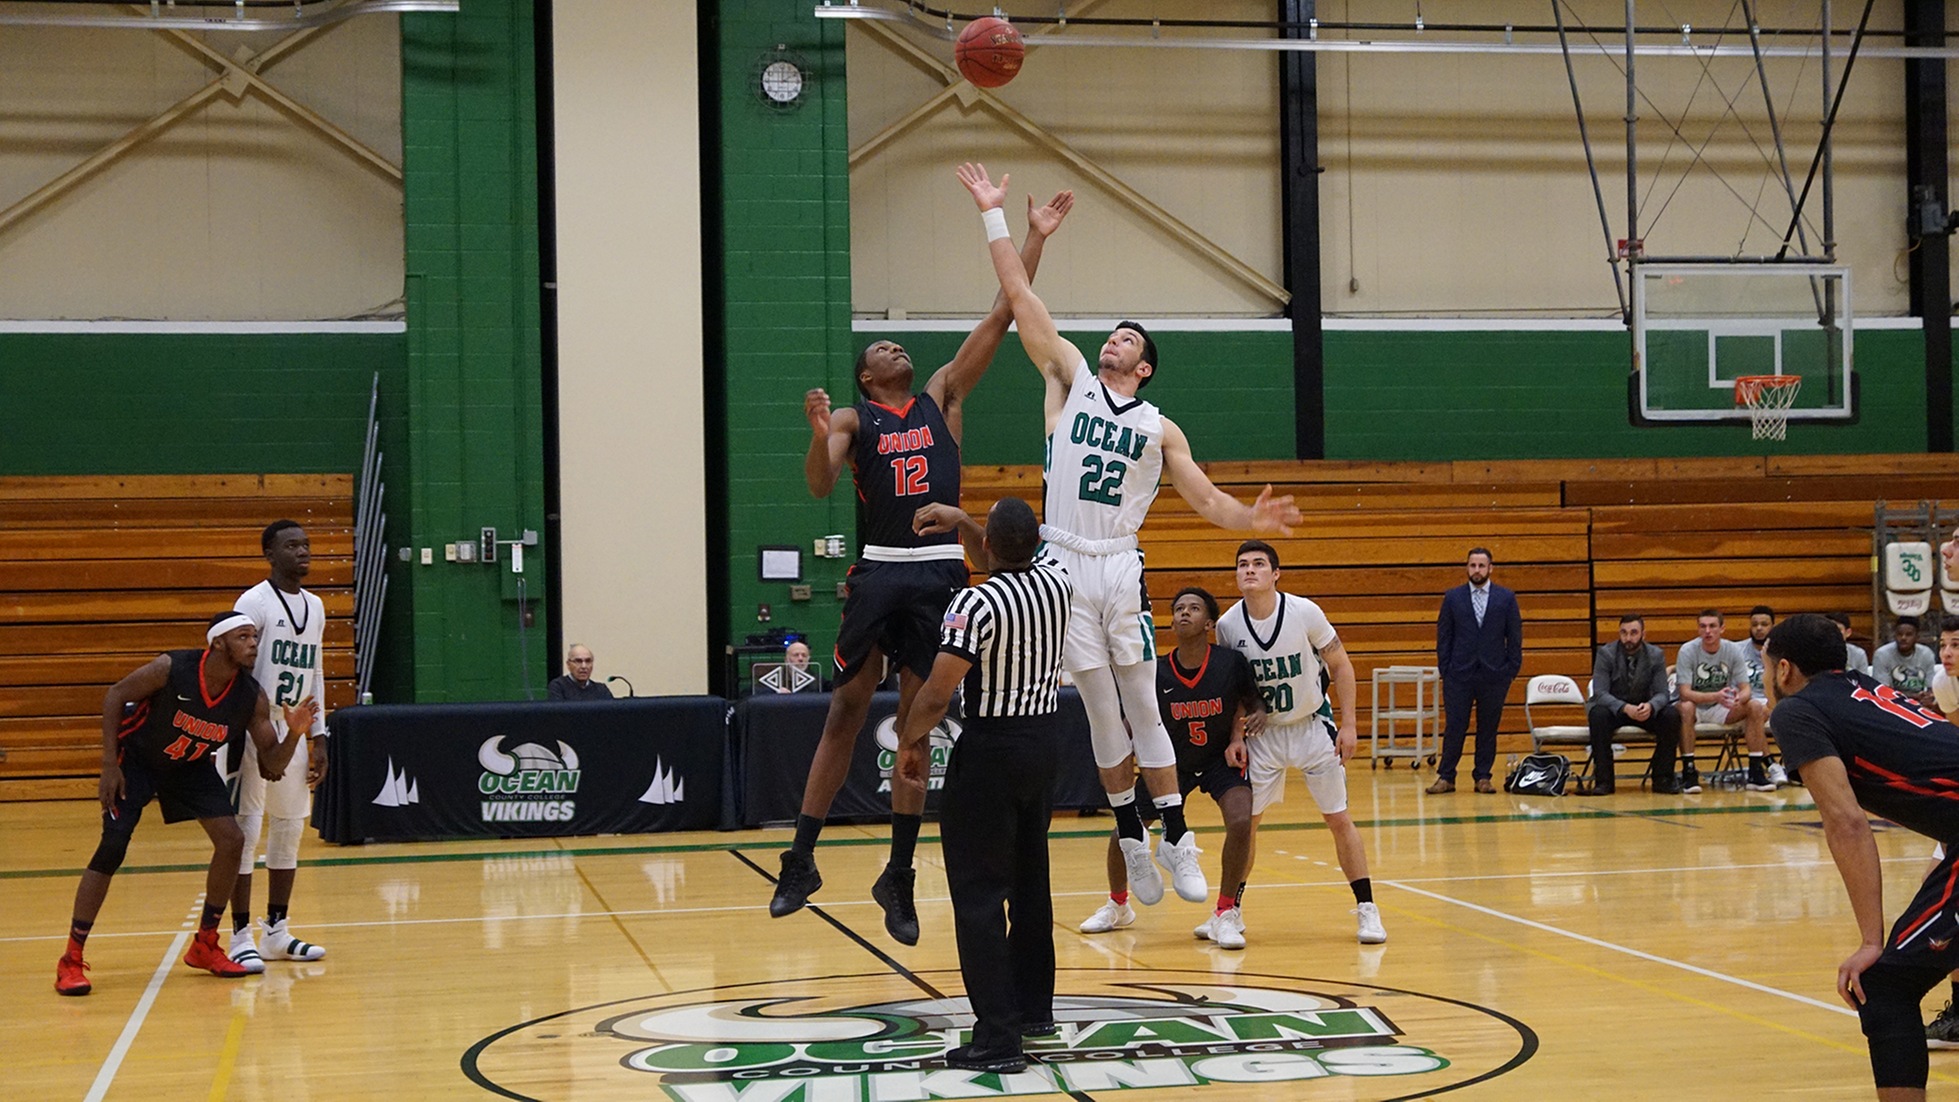 Demby, Marinaccio with Double-Doubles as Vikings Fall to Union, 107-88